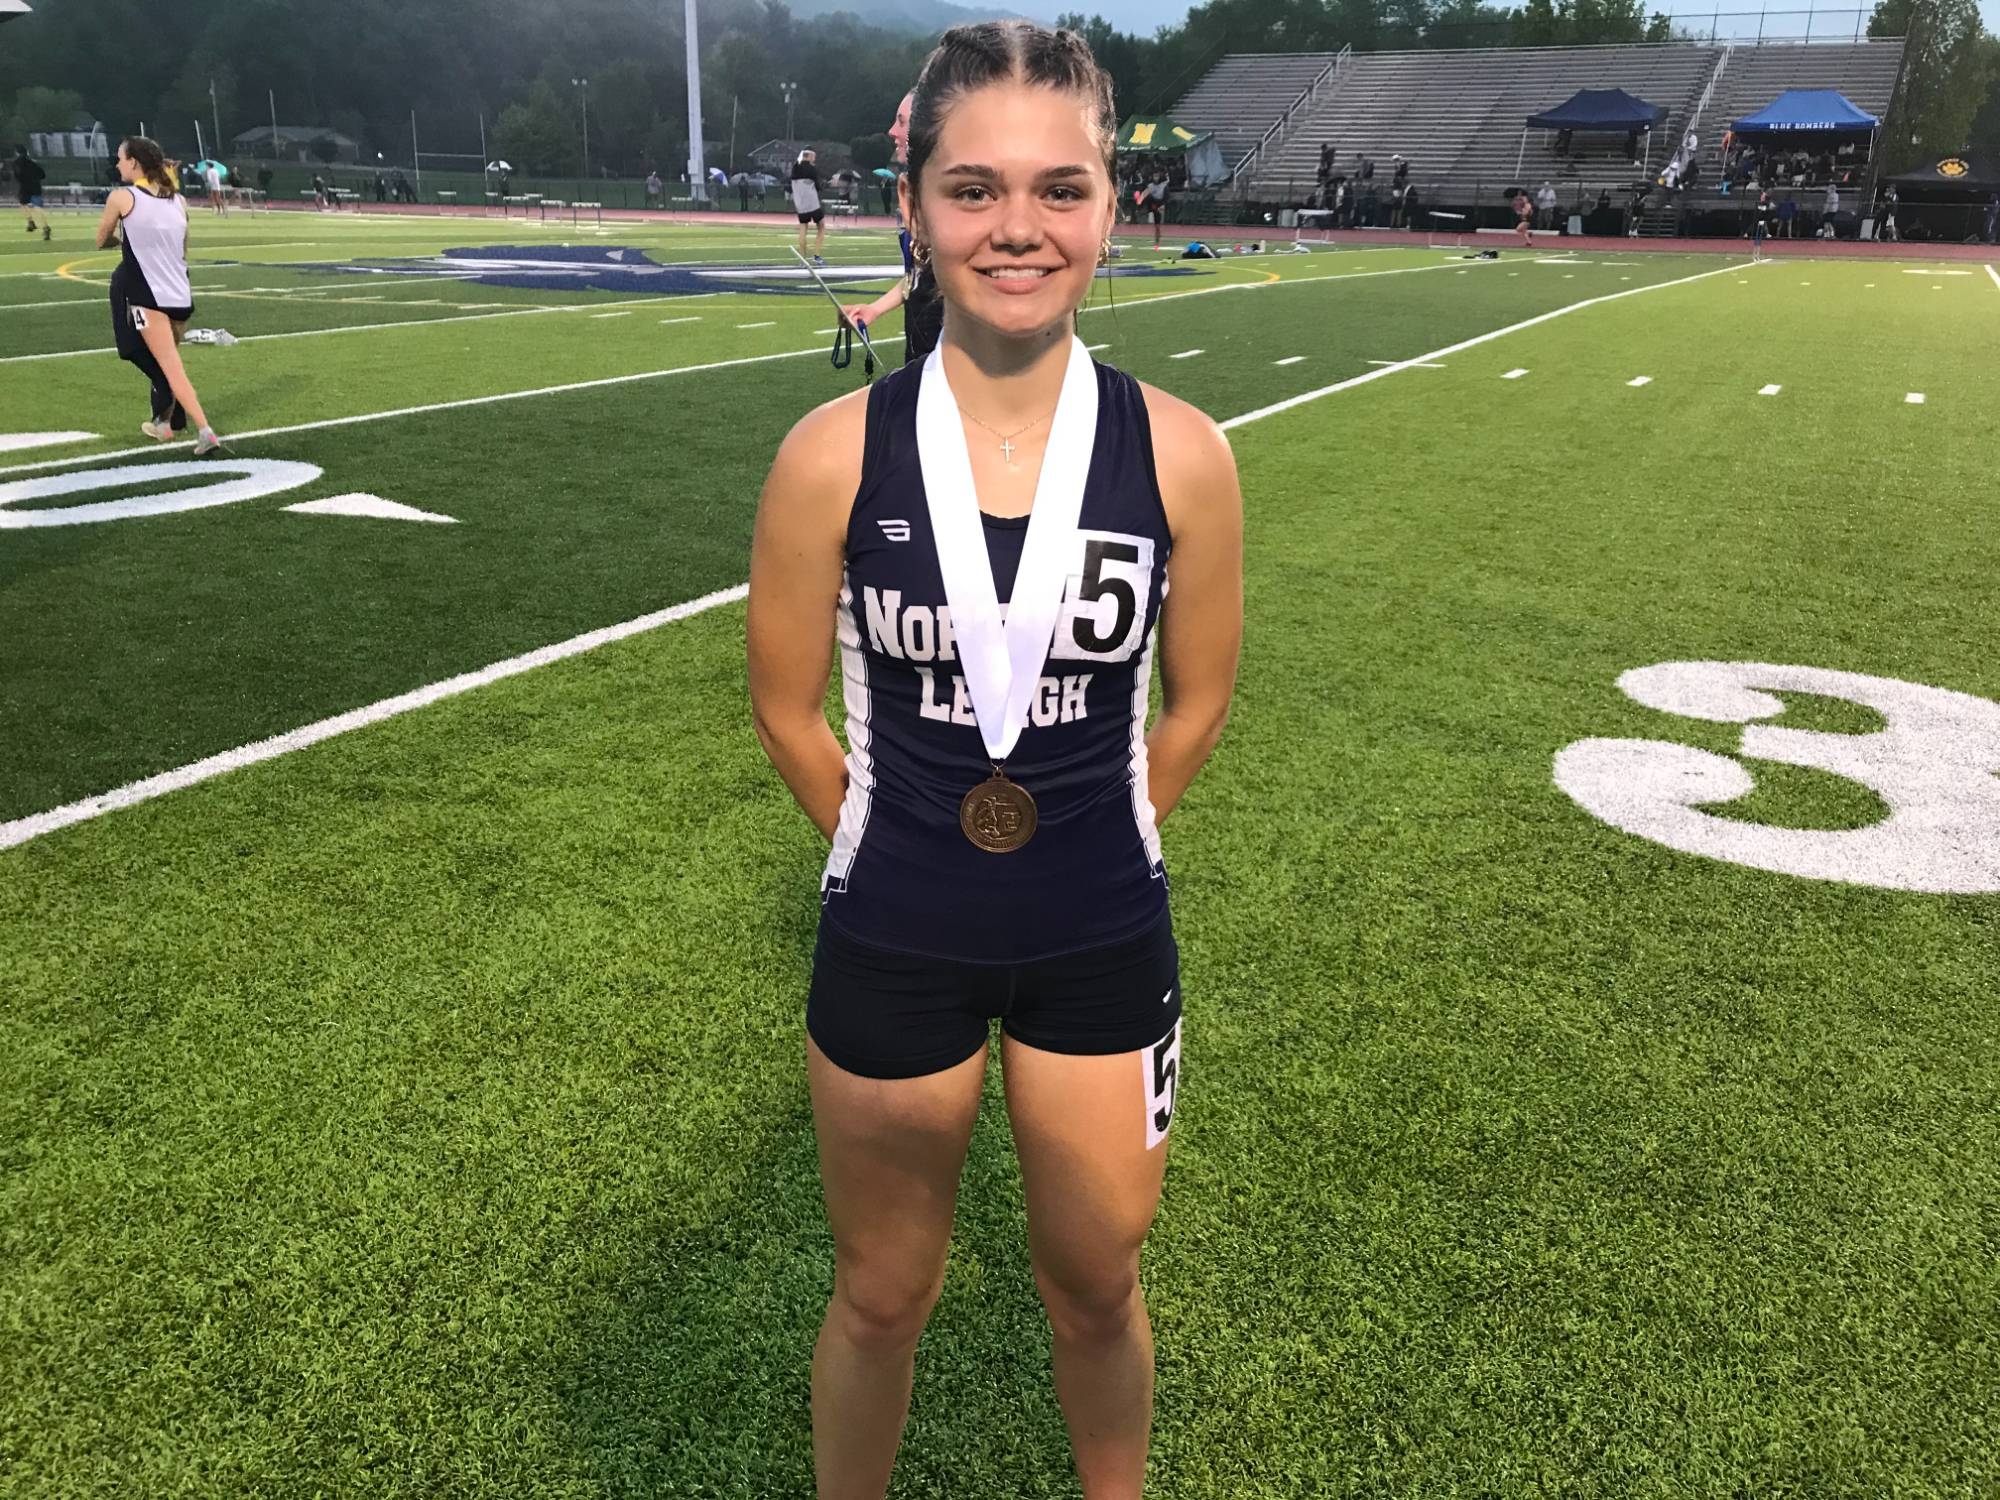 Heil Bronze Medal in the 3200 at the District XI Championship - Content Image for demo1213.bigteamsdemo_com_2075